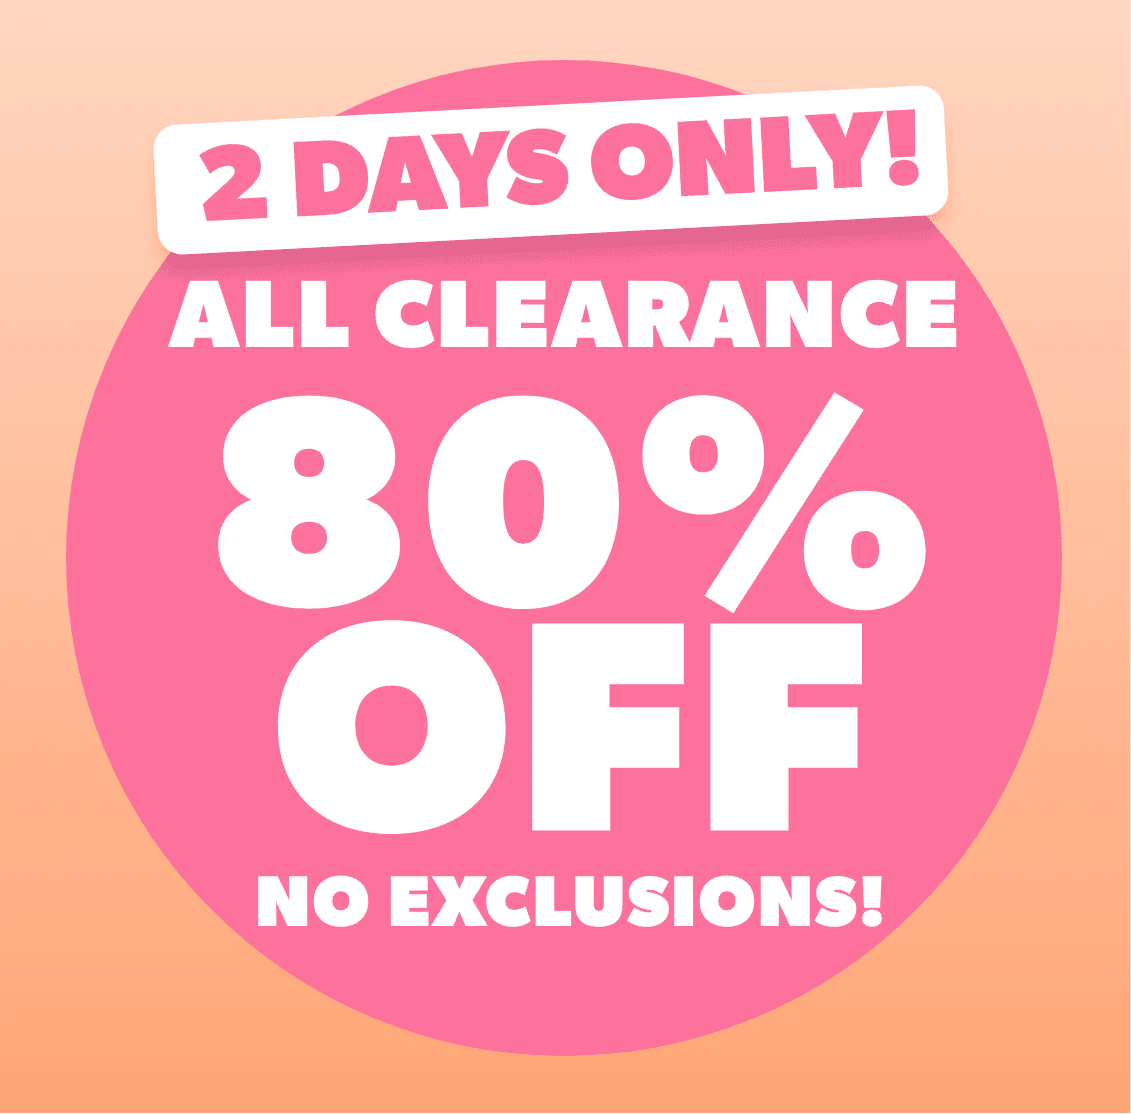 2 Days Only ALL CLEARANCE 80% Off NO EXCLUSIONS!